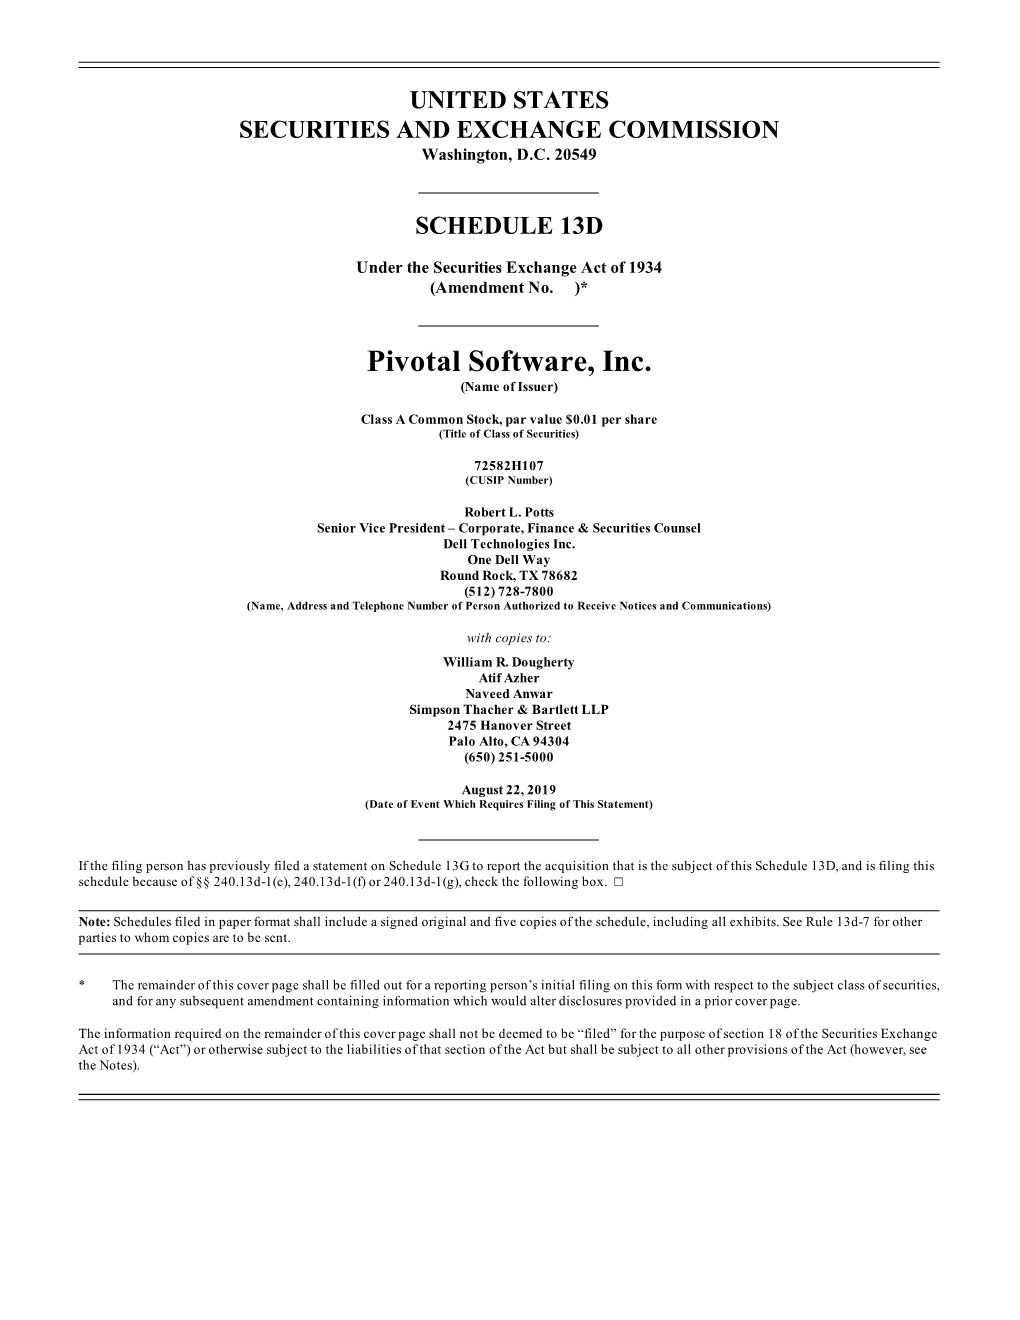 Pivotal Software, Inc. (Name of Issuer)